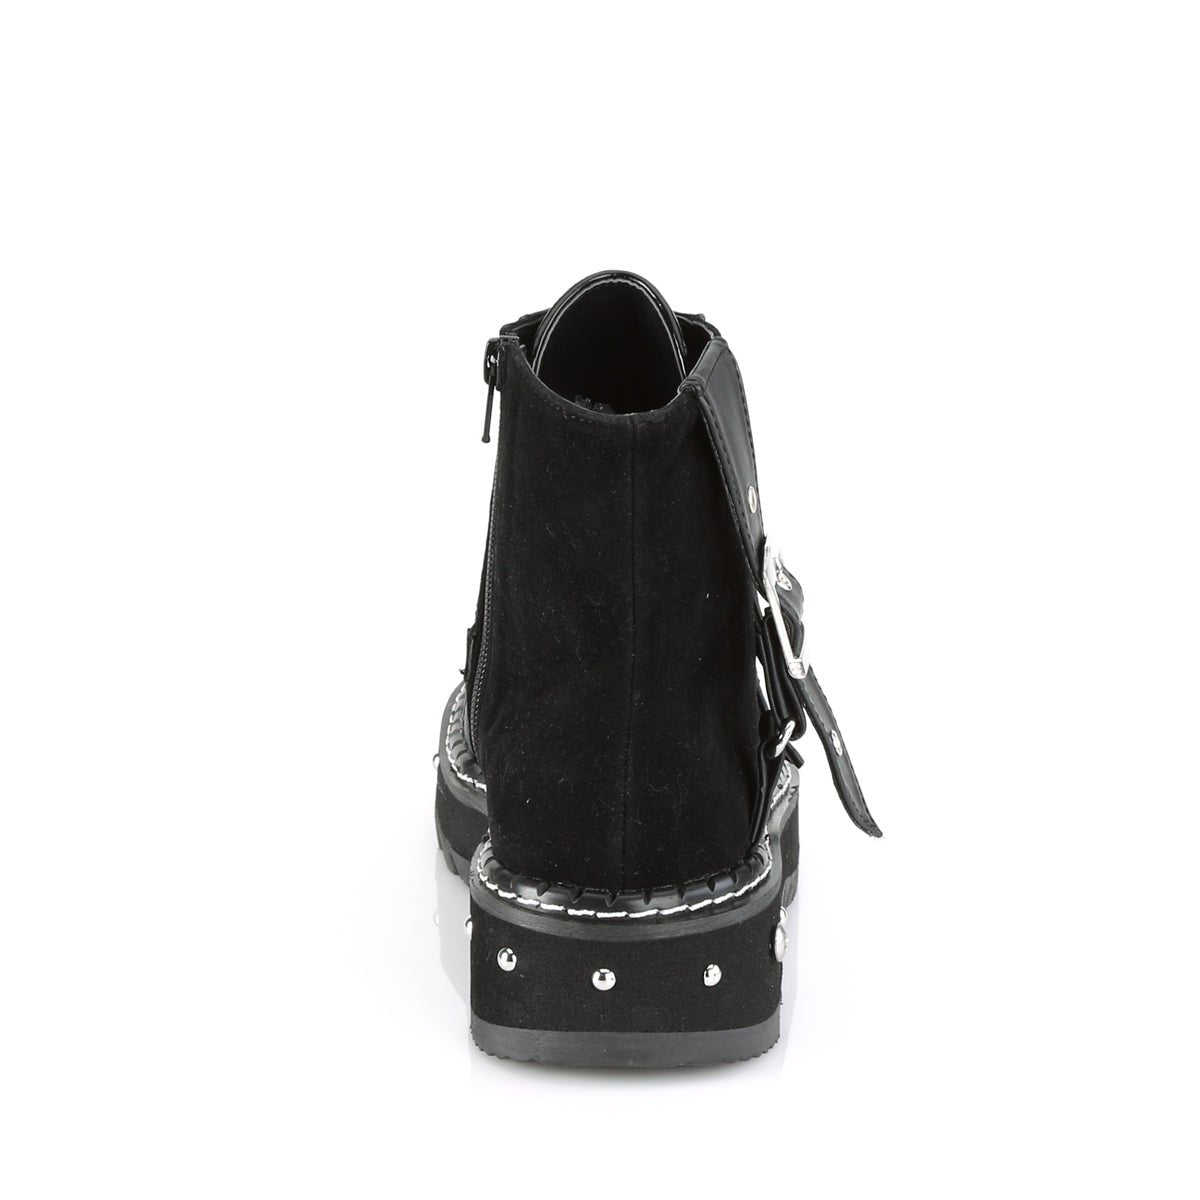 Too Fast | Demonia Lilith 278 | Black Vegan Leather & Vegan Suede Women's Ankle Boots